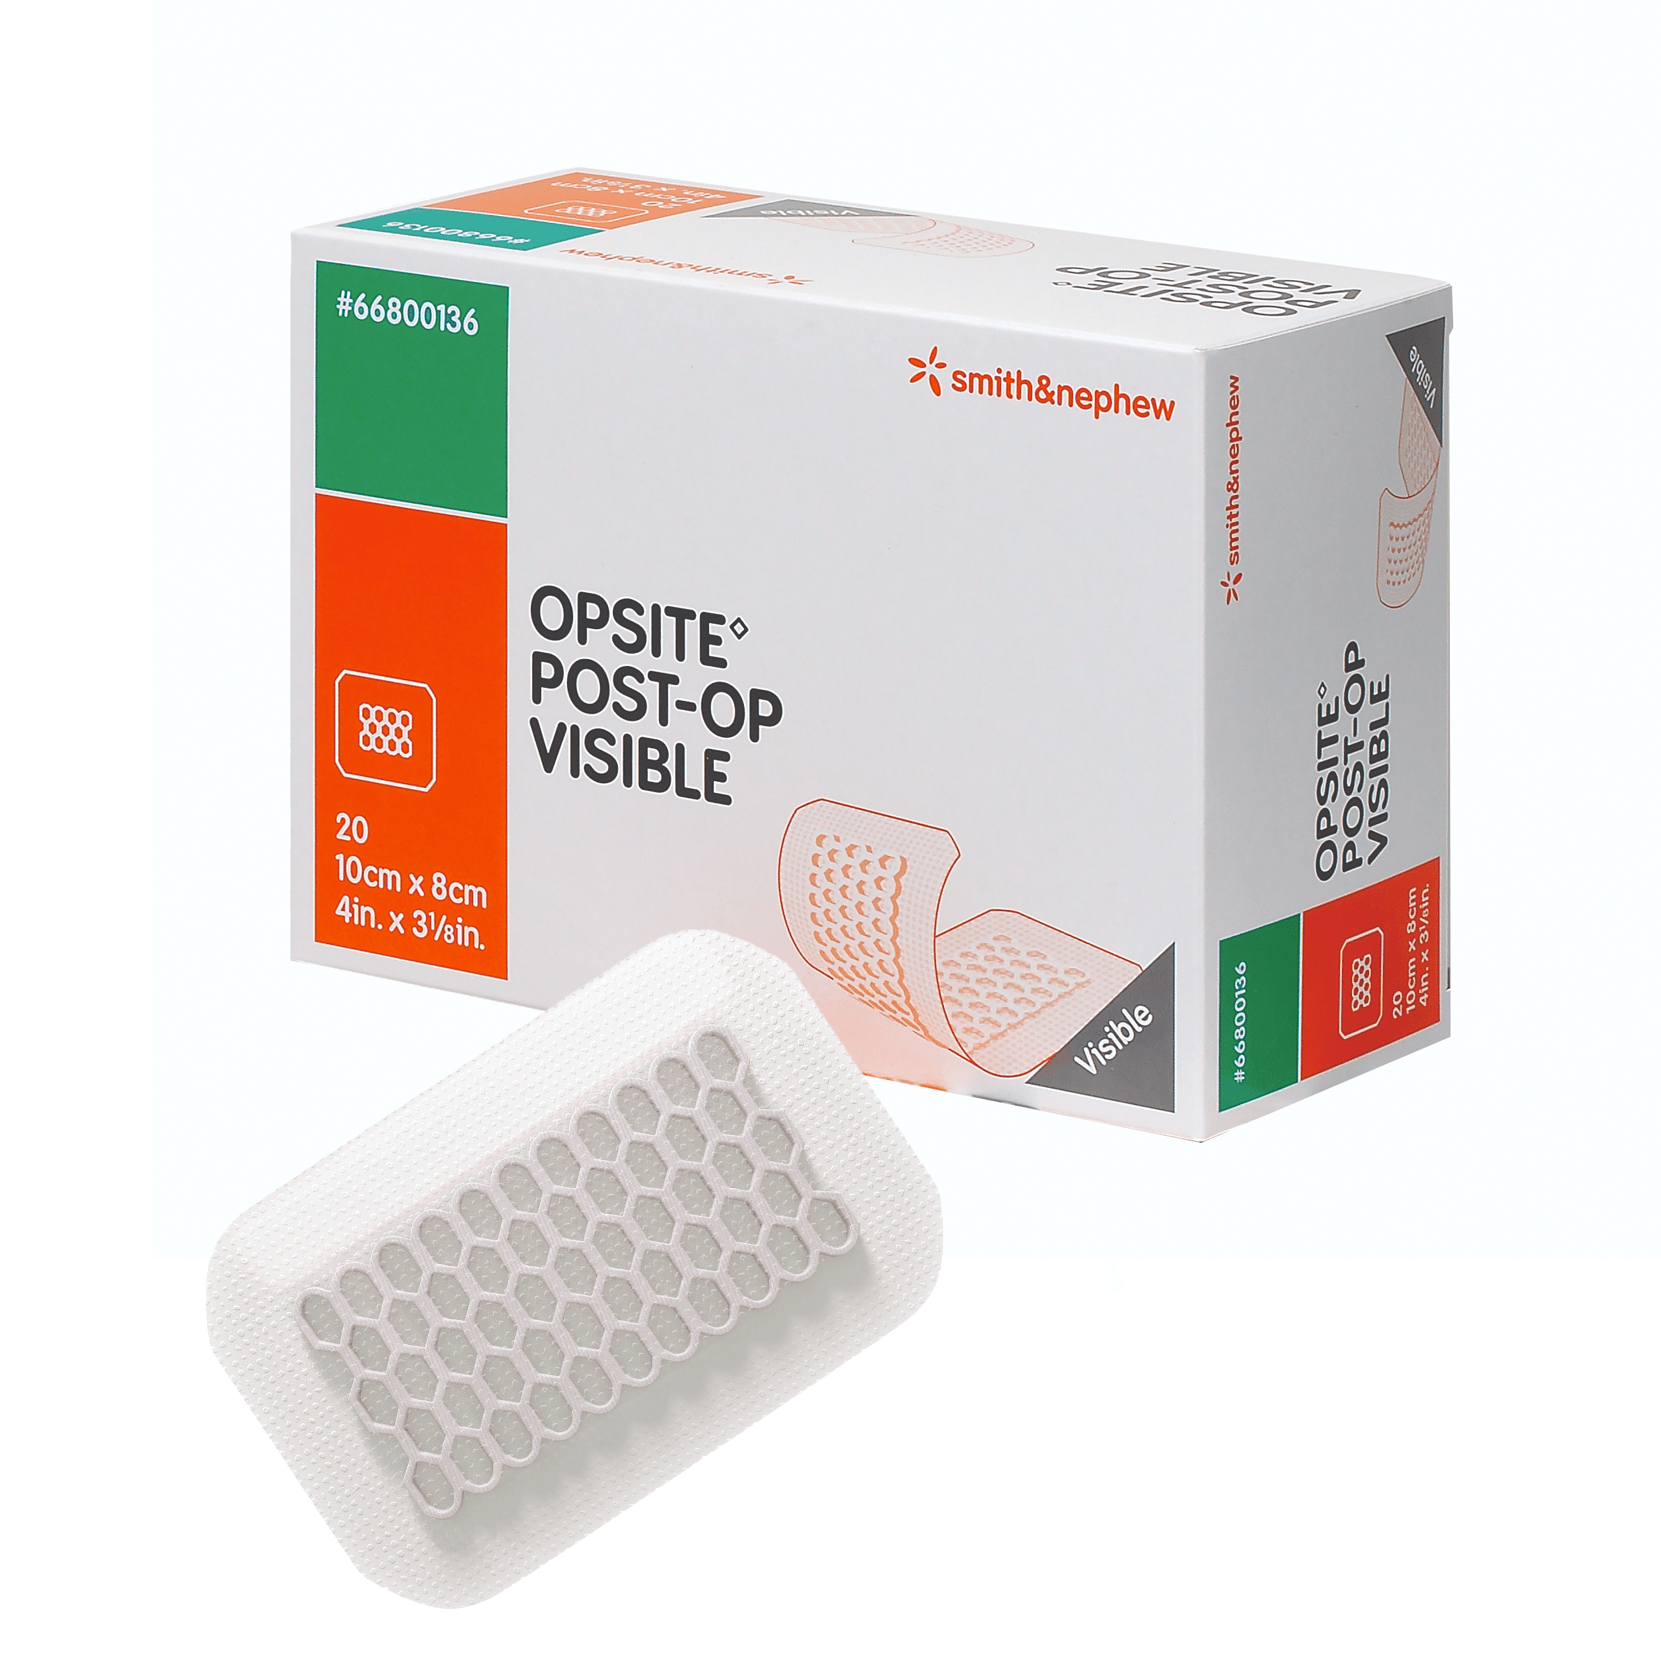 Smith & Nephew Opsite Post-Op Visible Dressing with Absorbent Pad